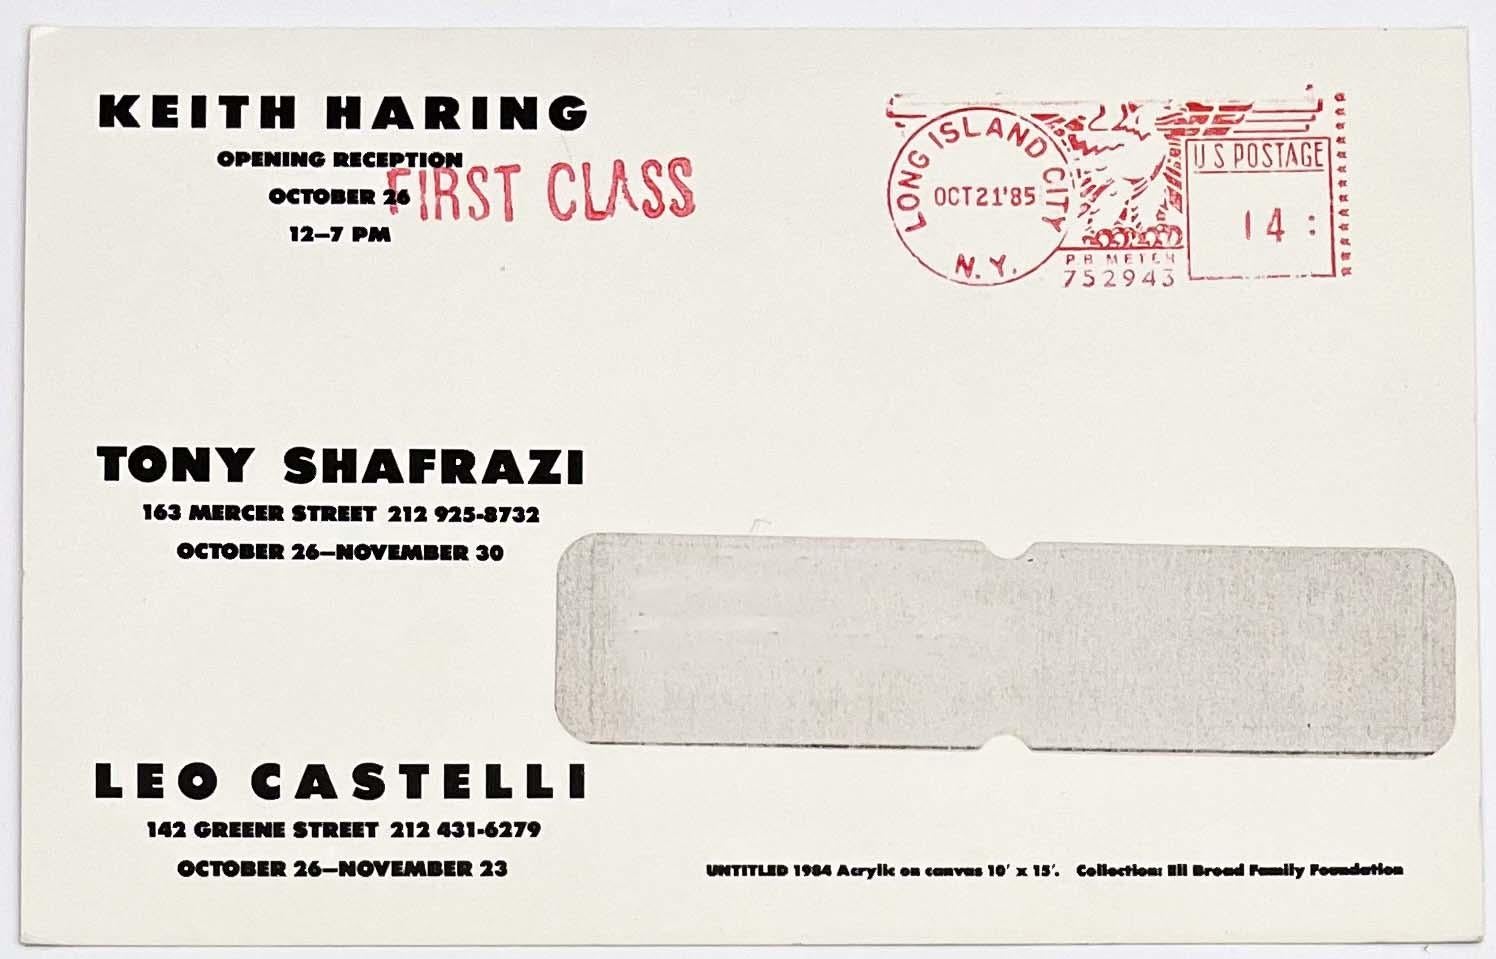 Keith Haring Tony Shafrazi/Leo Castelli Gallery, New York, 1985: 
Rare original 1980s Keith Haring announcement published on the occasion of: 

Keith Haring at Tony Shafrazi Gallery, October 26 to November 30 and Leo Castelli Gallery October 26 to